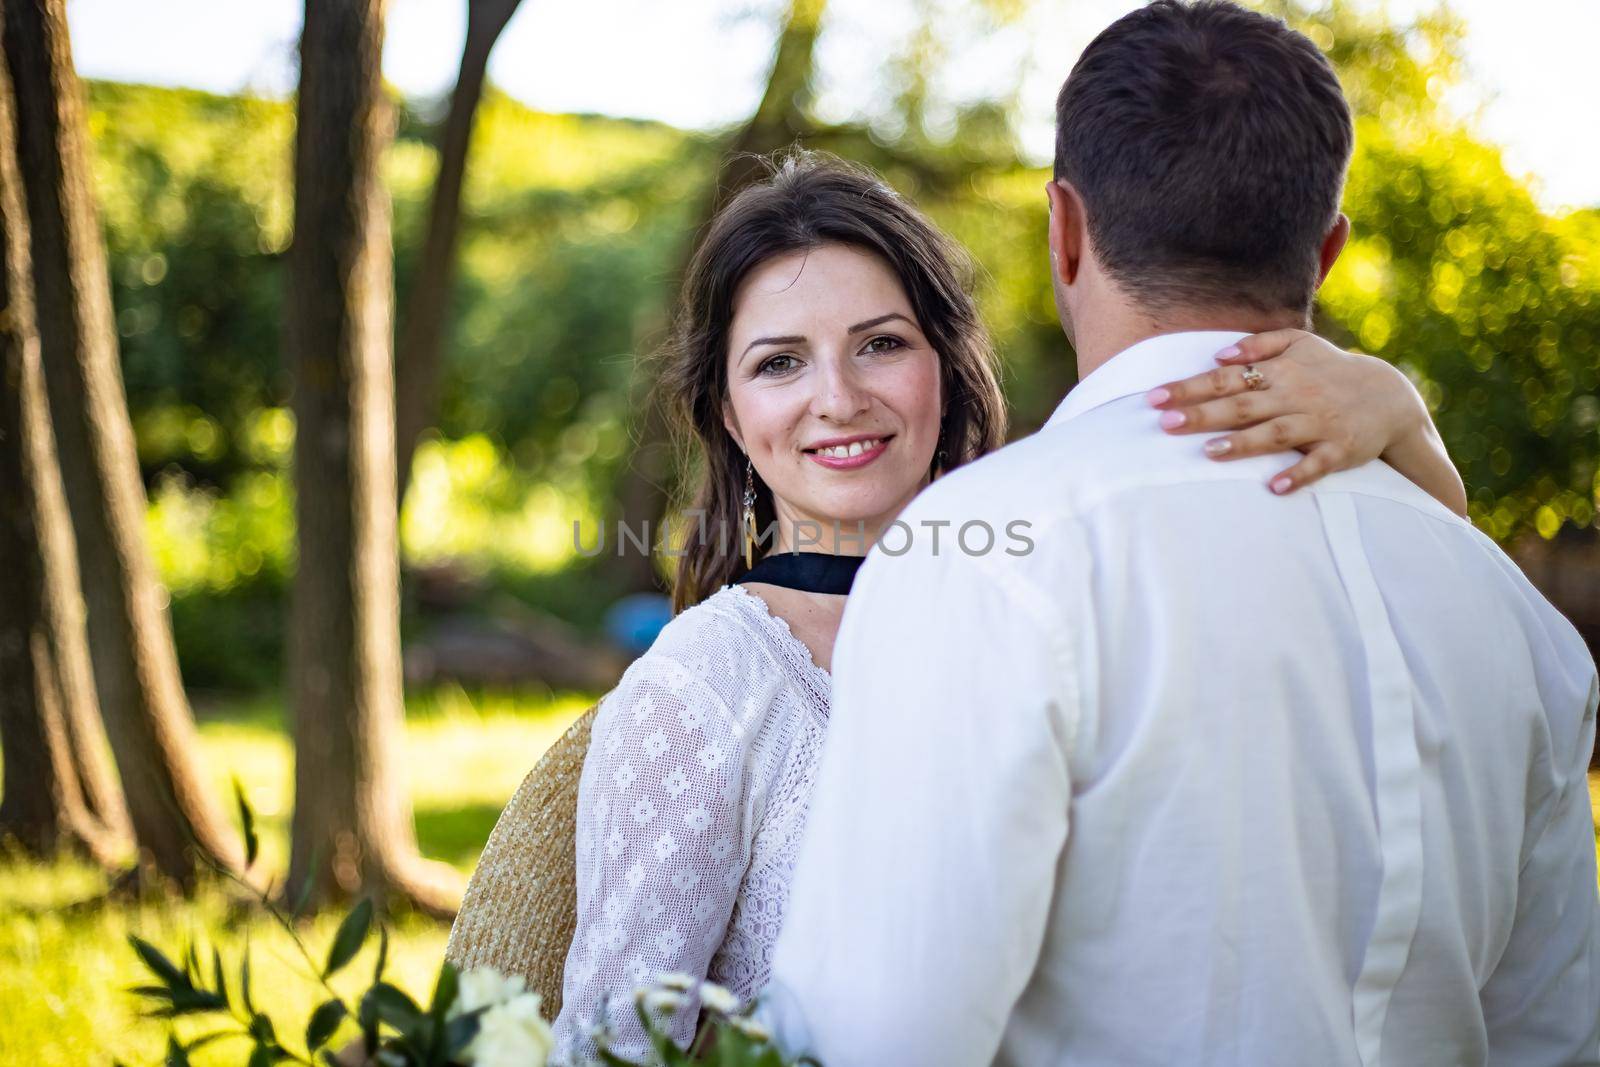 Portrait of a happy bride and groom, in boho style wedding dresses, against the backdrop of beautiful nature.